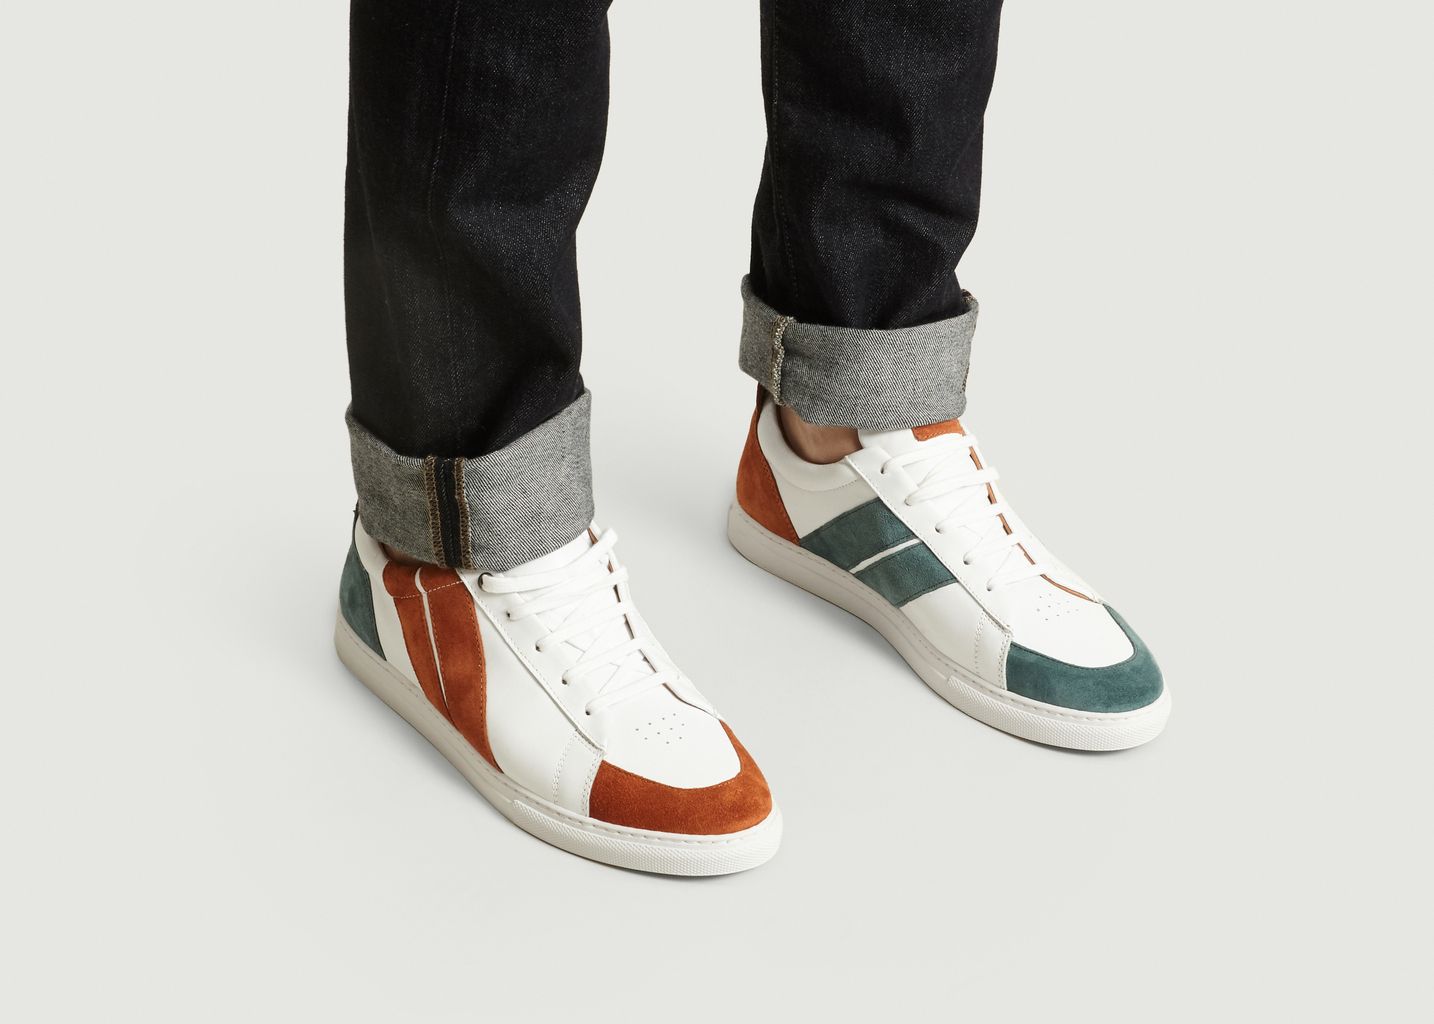 Ginger Lagoon Trainers - Caval